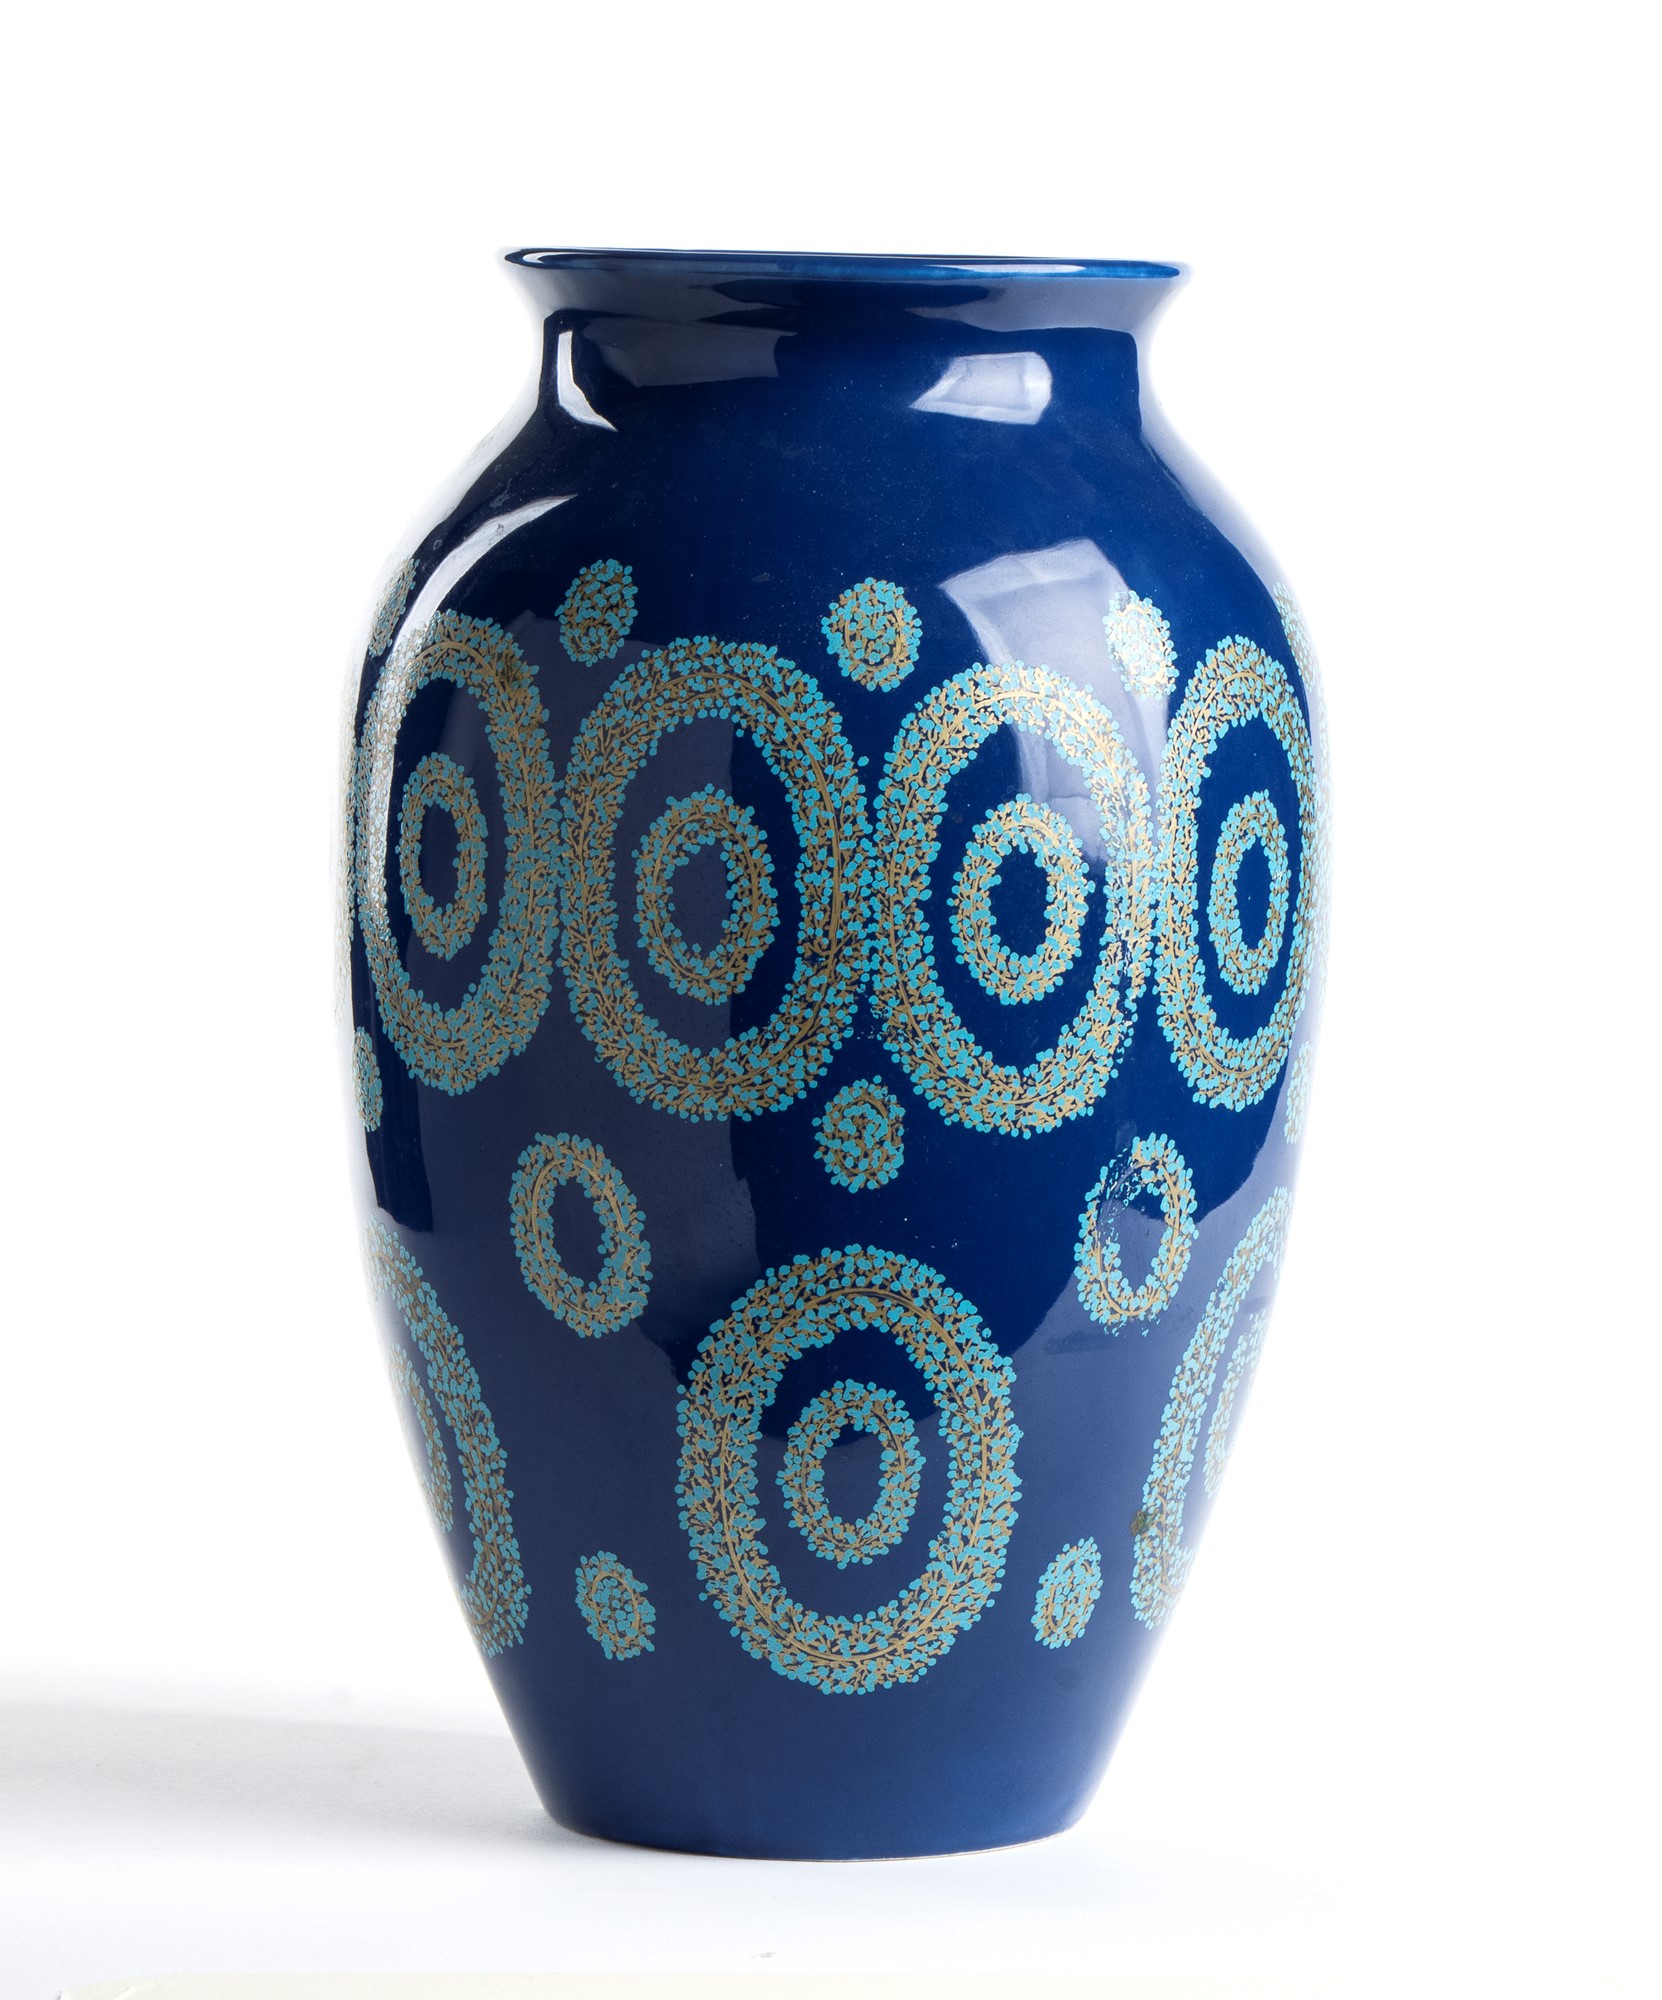 Blue ceramic vase with special celestial decorations and gold highlights